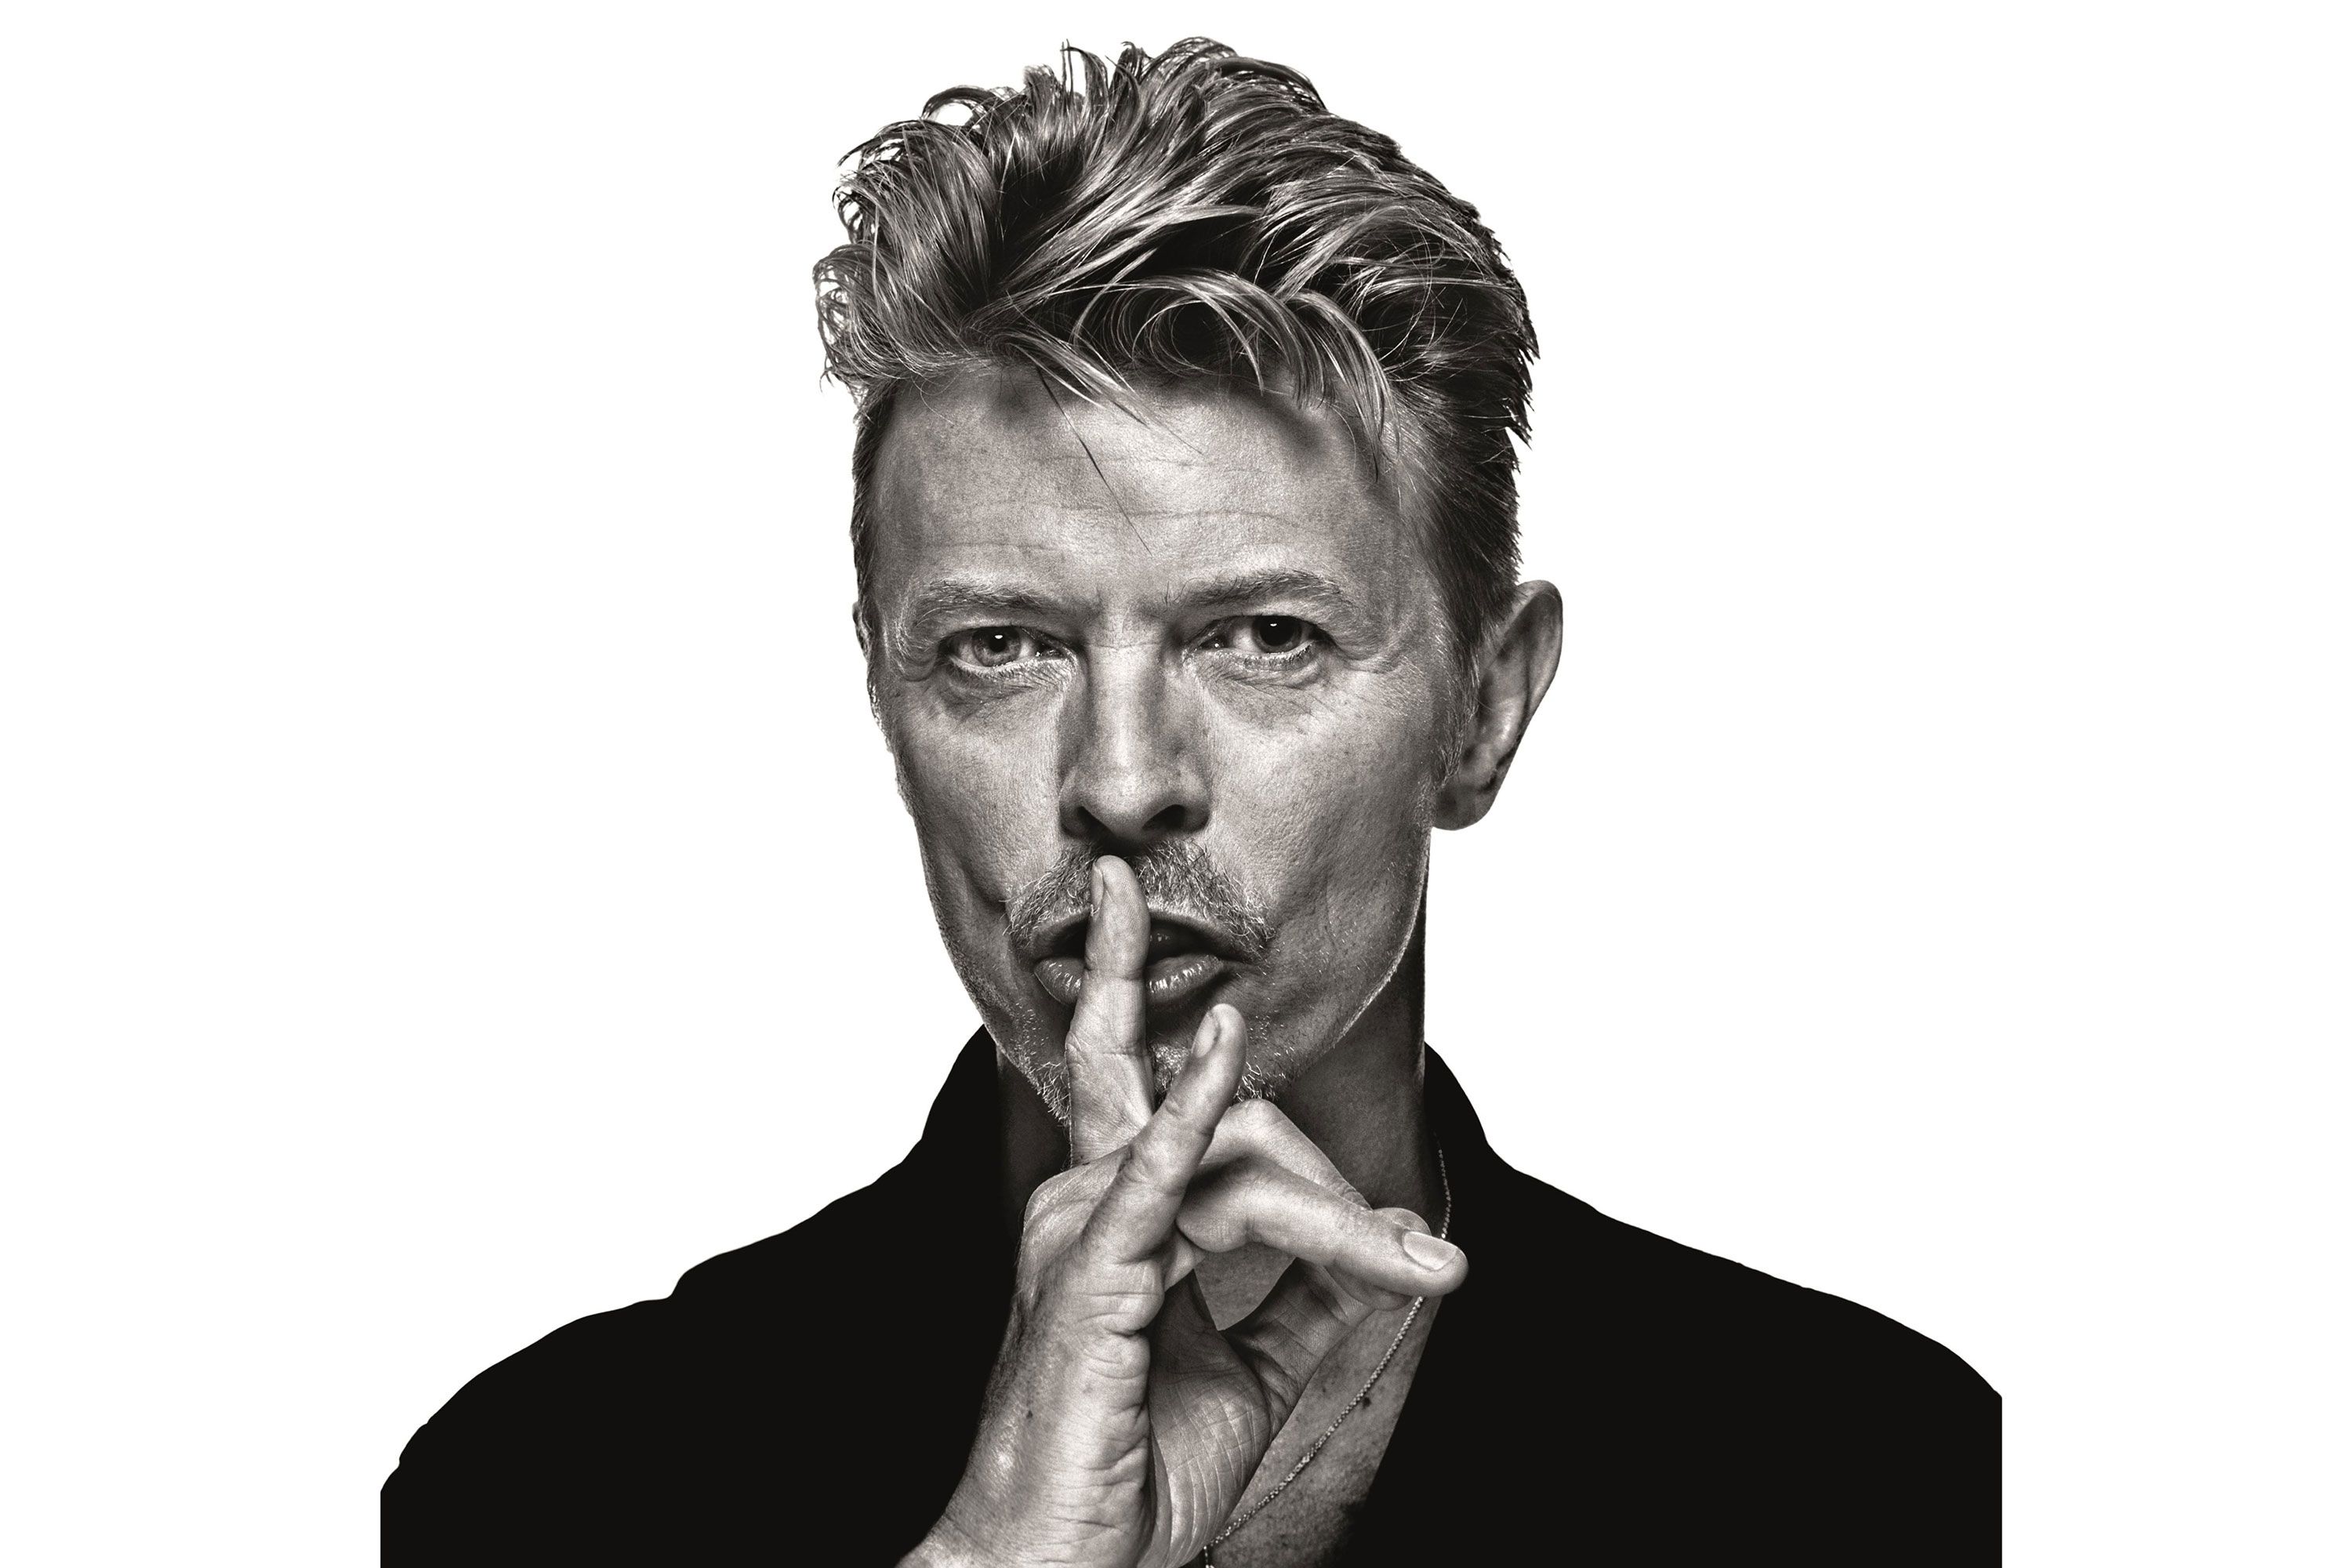 David Bowie quotes and life advice